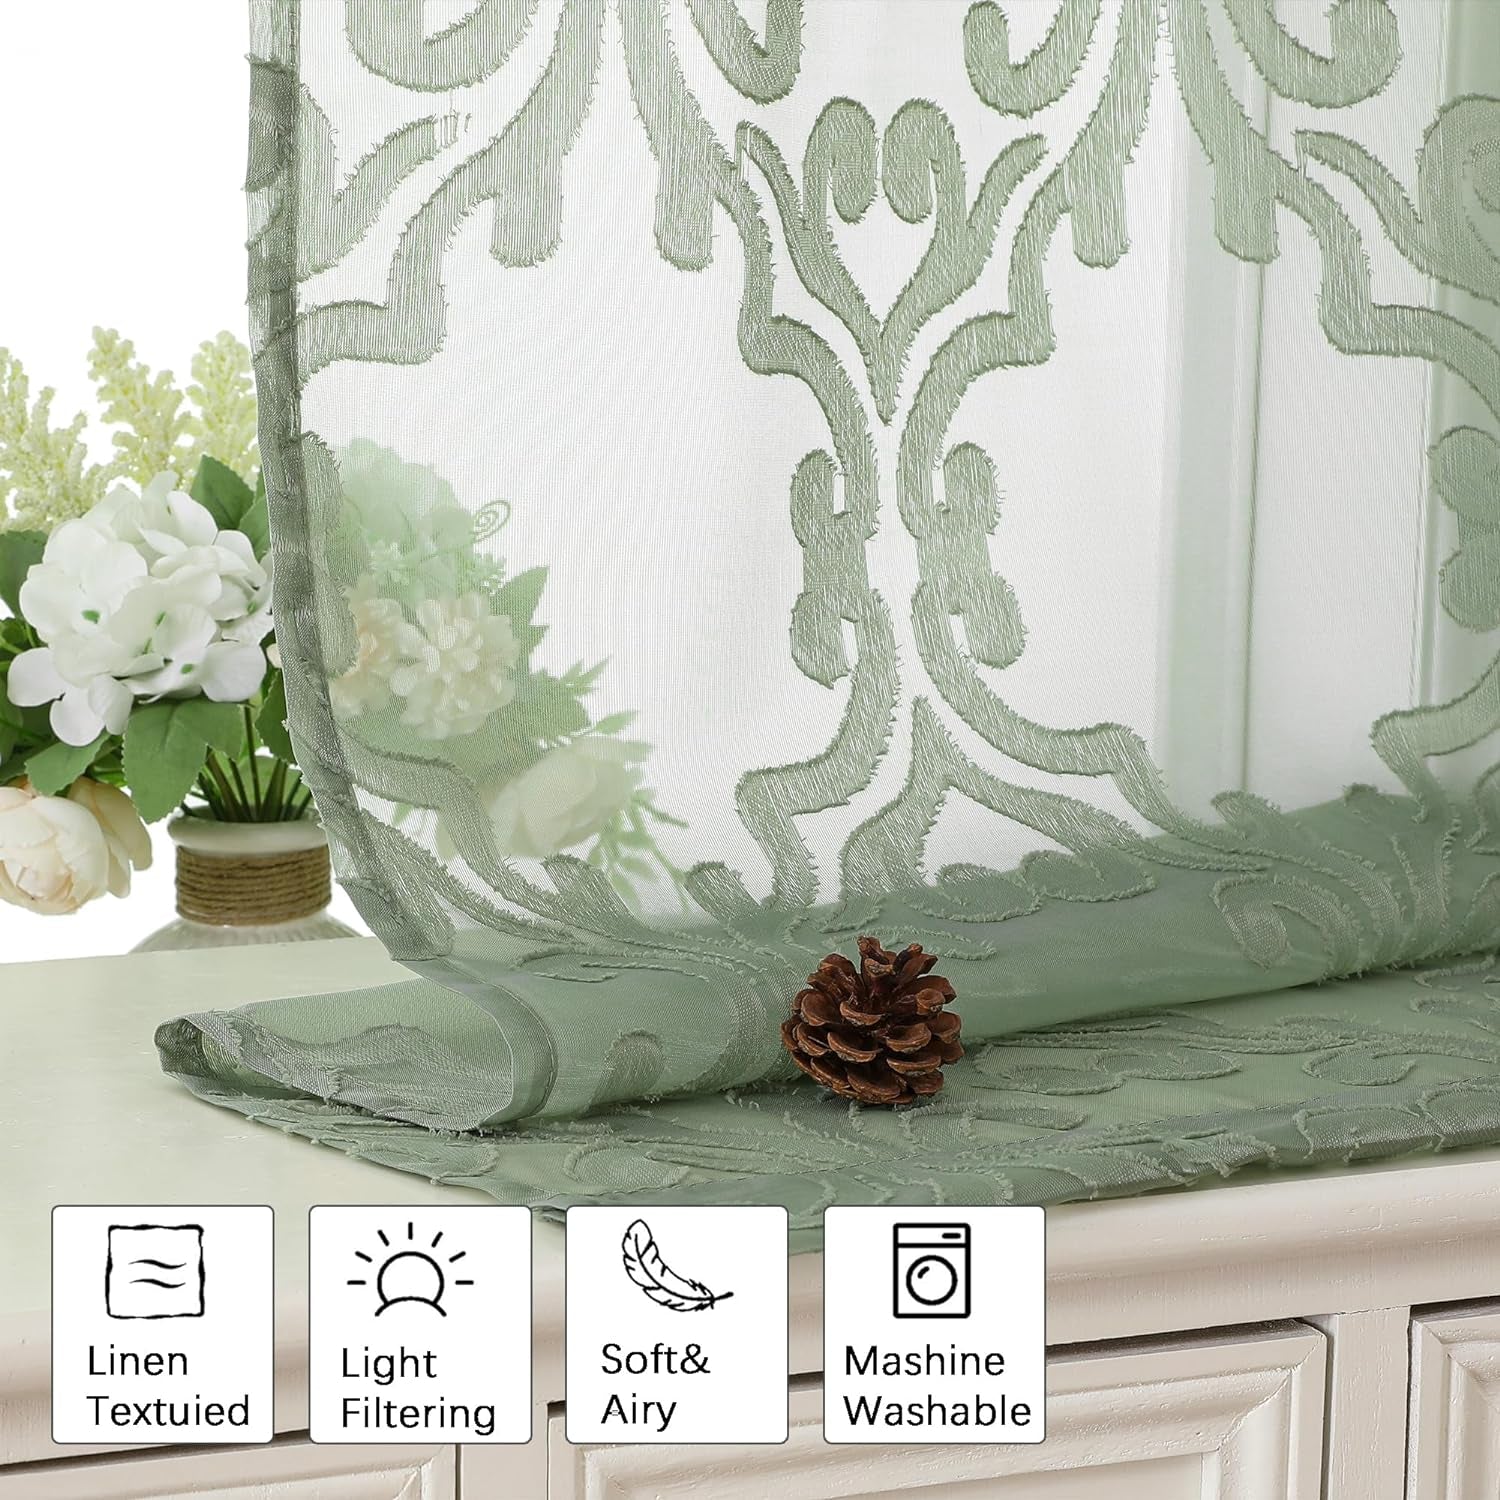 Aiyufeng Suri 2 Panels Sheer Sage Green Curtains 63 Inches Long, Light & Airy Privacy Textured Sheer Drapes, Dual Rod Pocket Voile Clipped Floral Luxury Panels for Bedroom Living Room, 42 X 63 Inch  Aiyufeng   